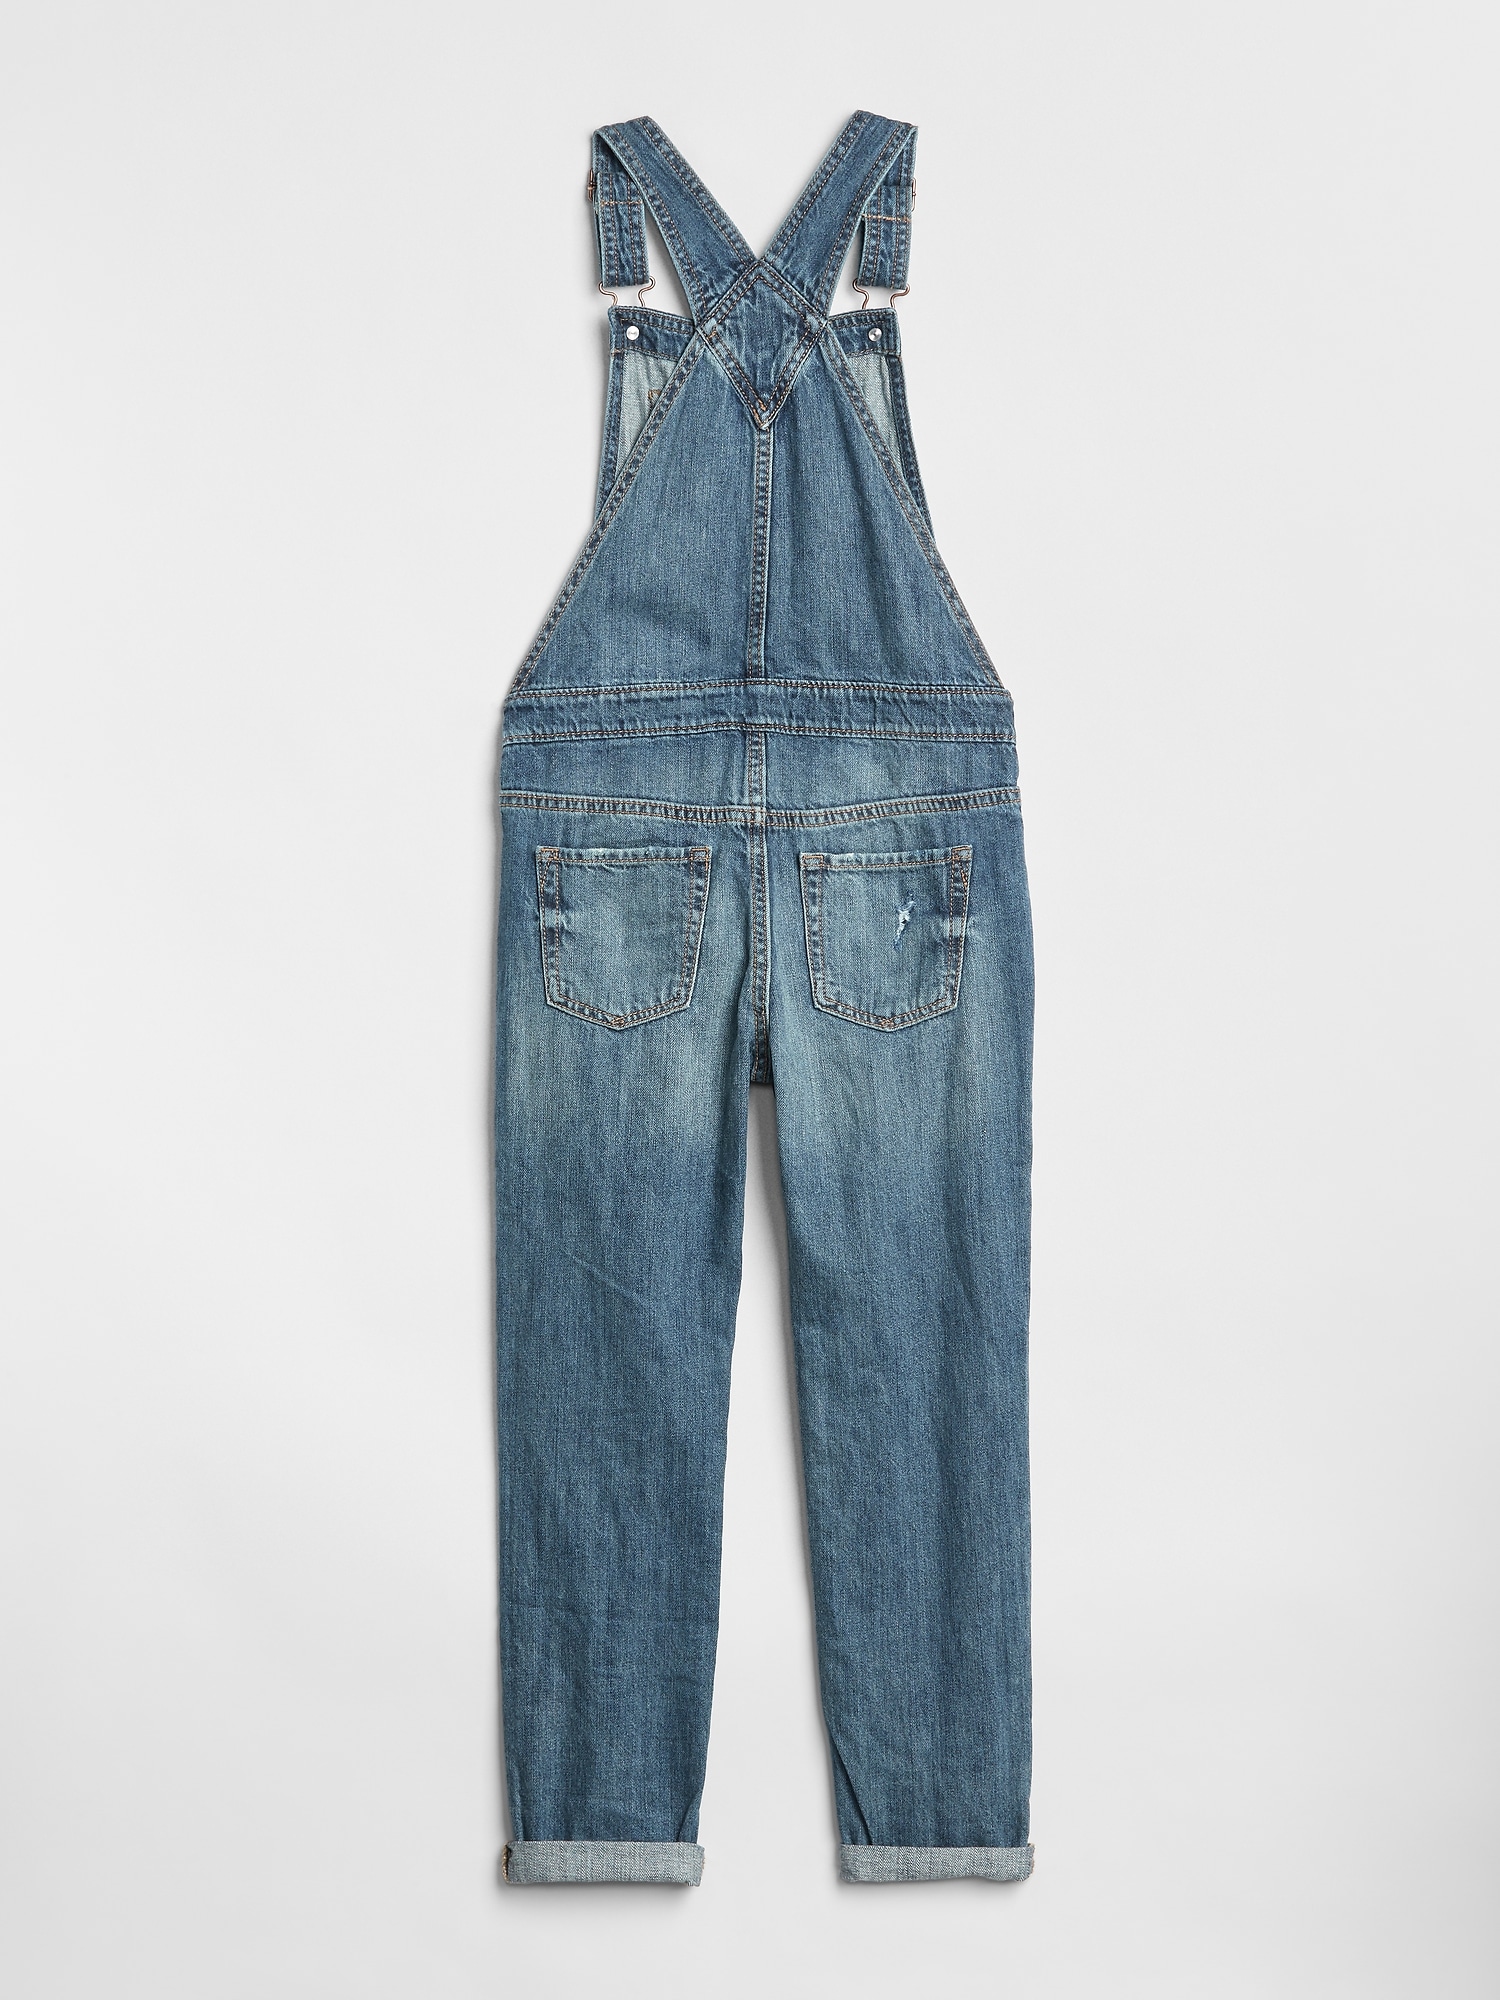 4th of July Denim Overalls – Emerson and Friends